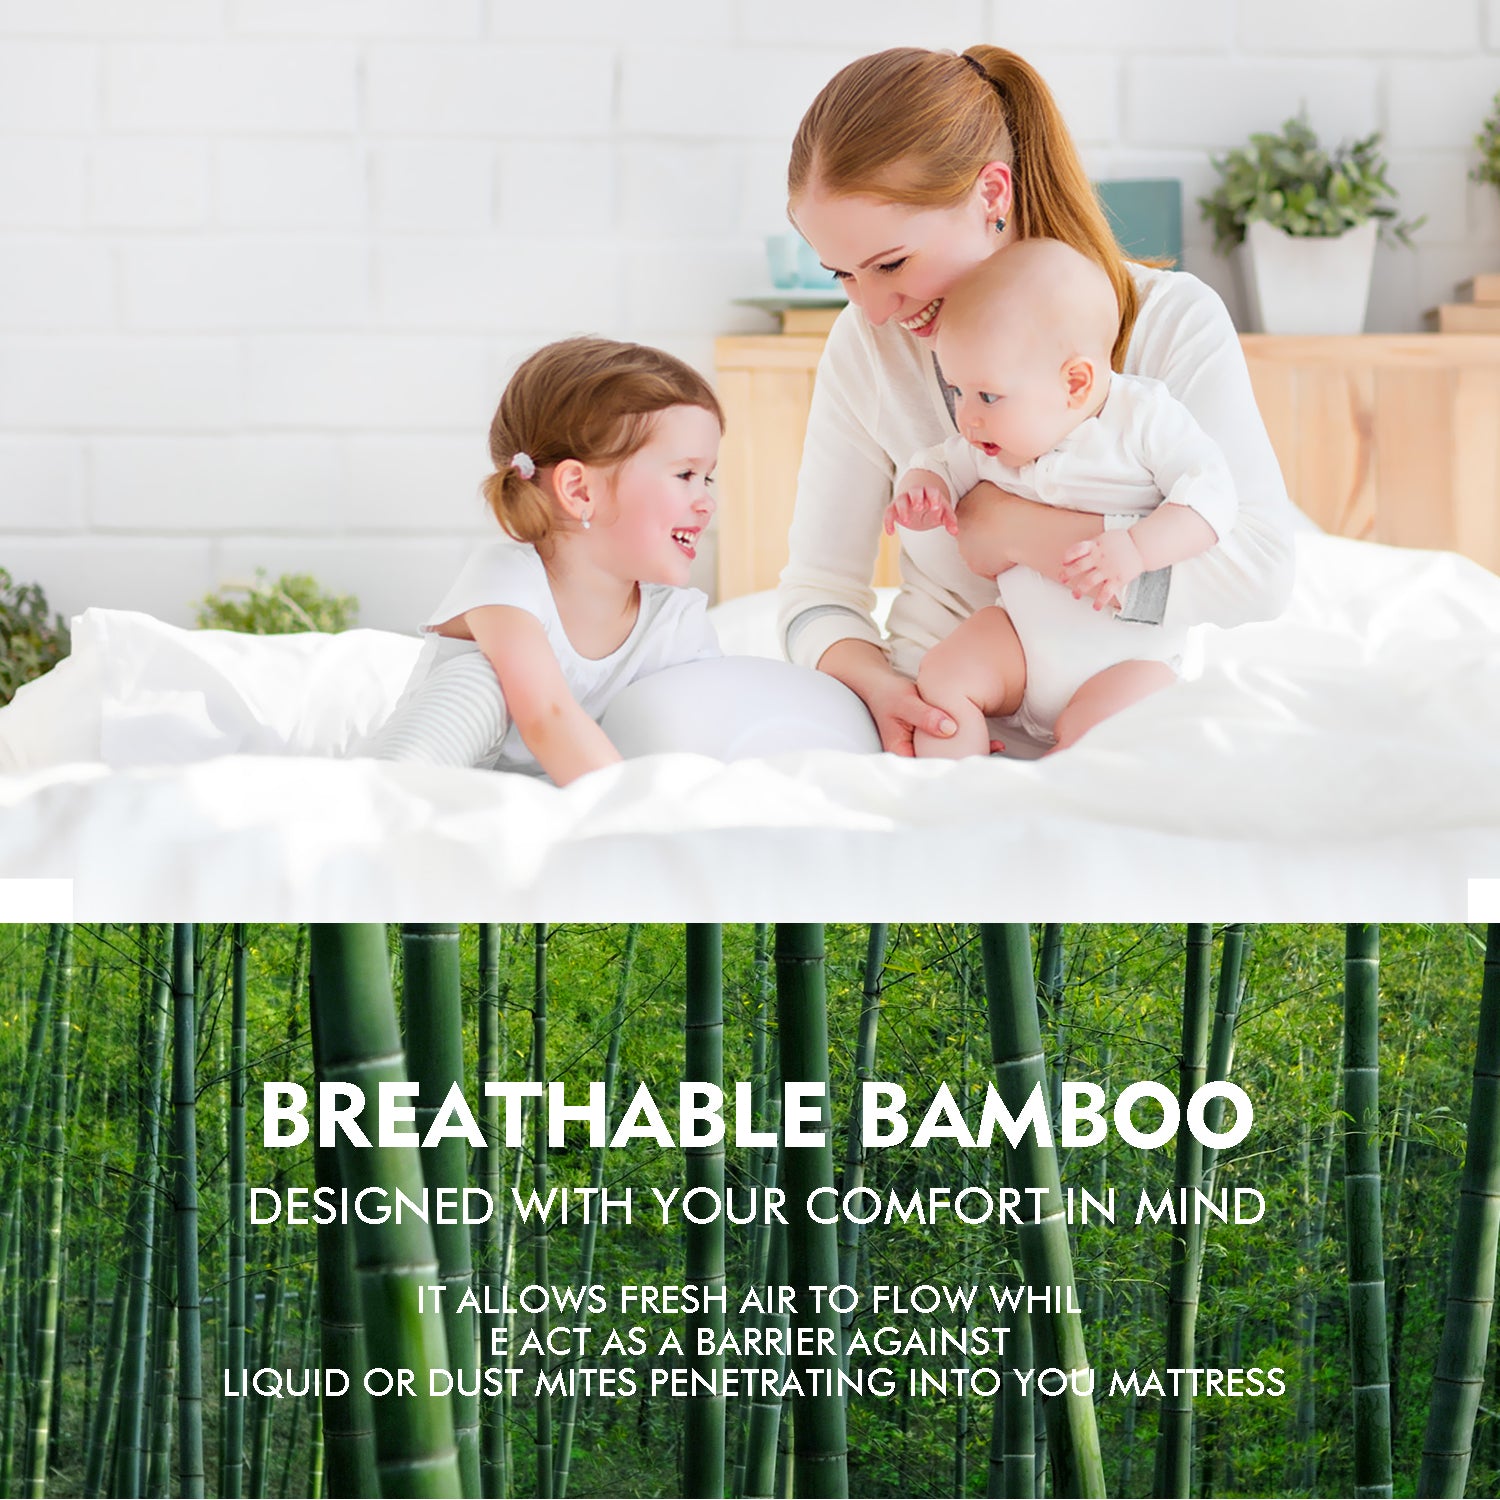 Fitted Waterproof Breathable Bamboo Mattress Protector Super King Size - image5